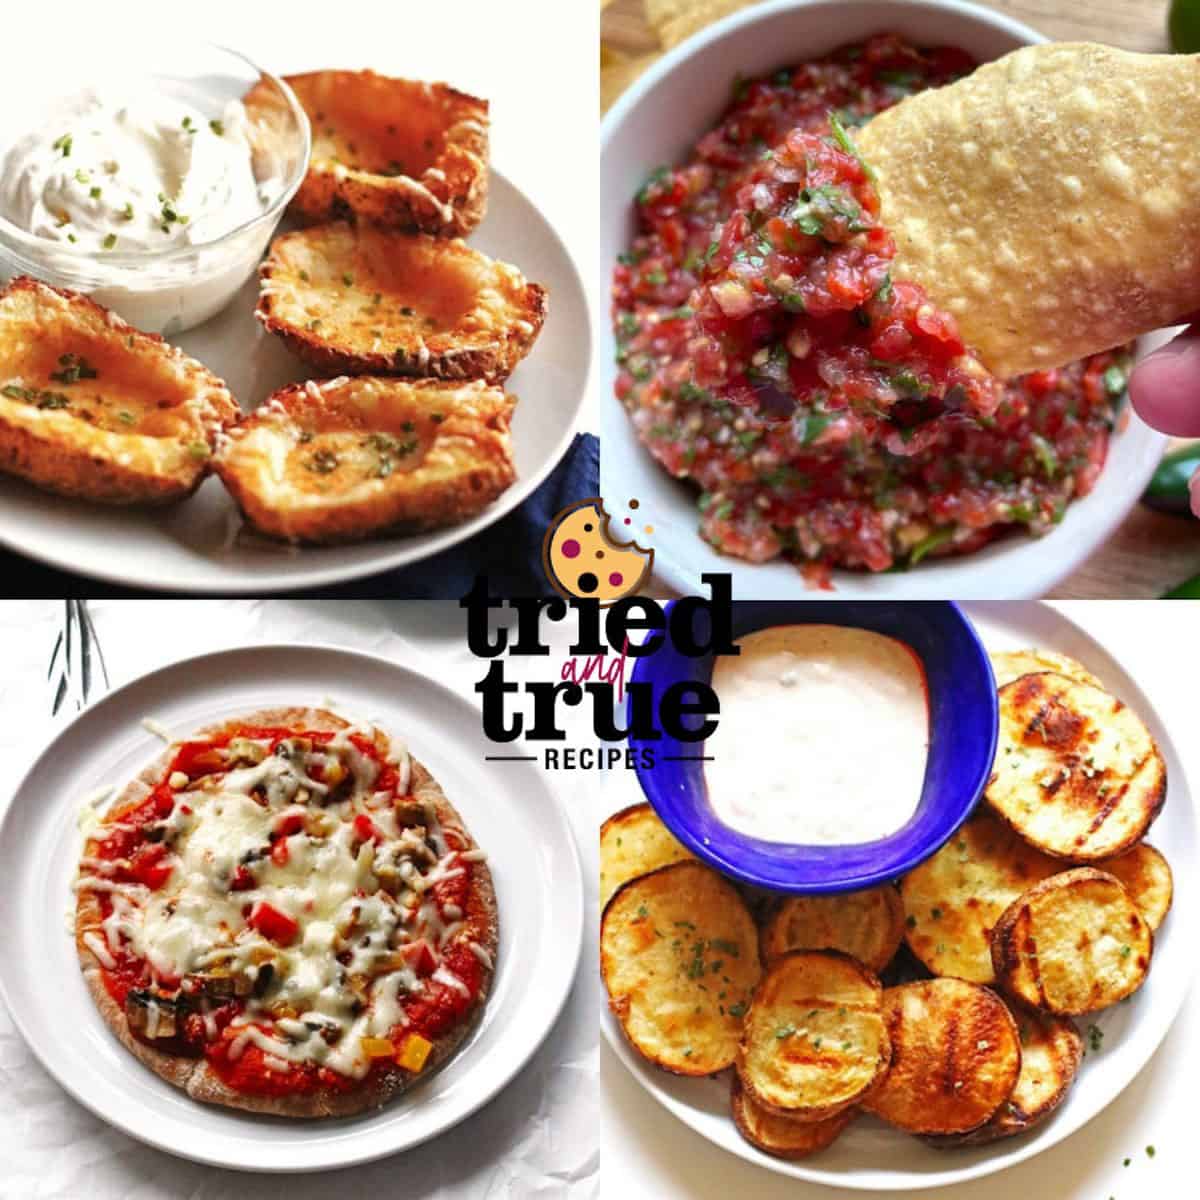 A collage of images showing appetizers for pizza - potato skins, chips and salsa, grilled potatoes with blue cheese, and a pita pizza.